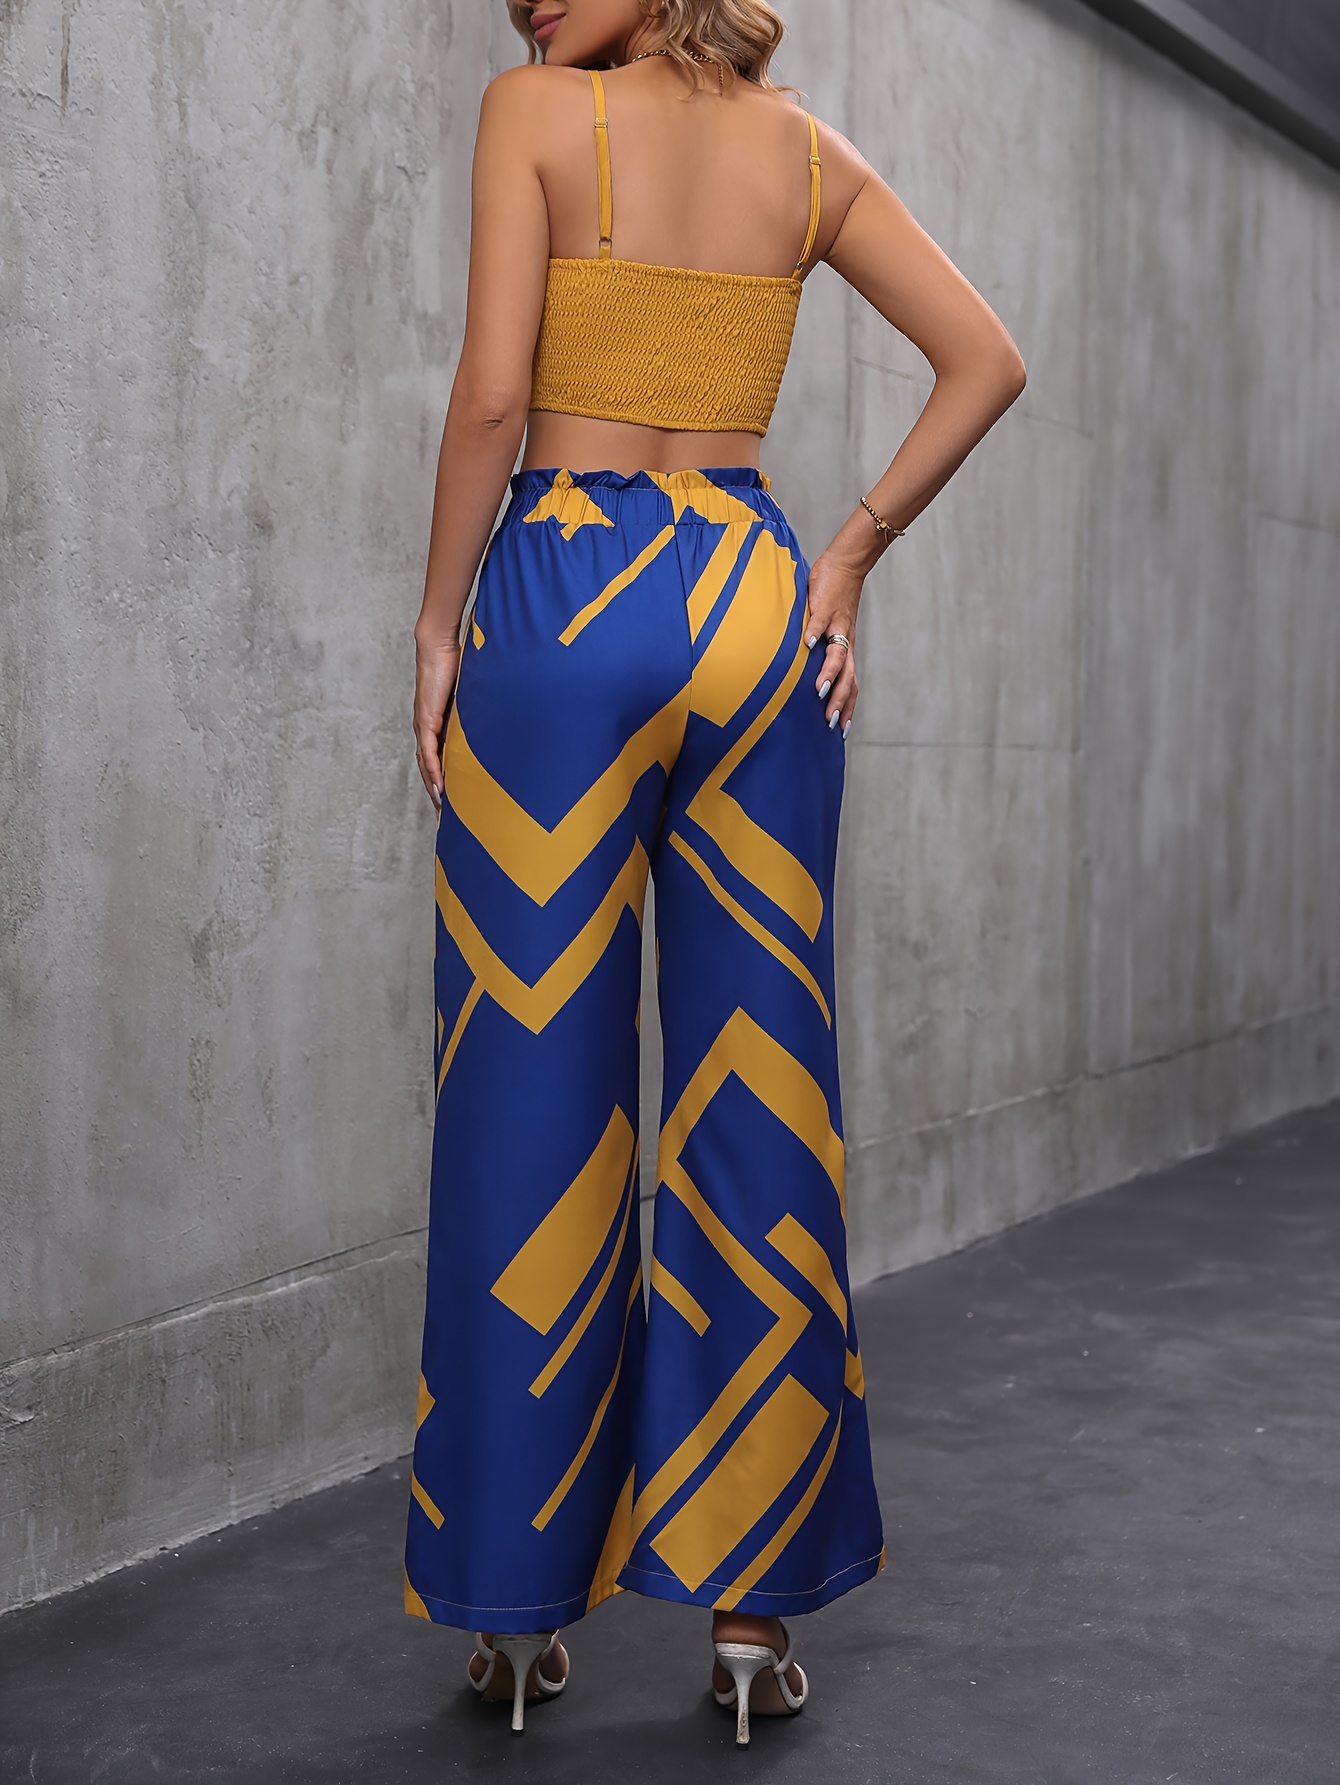 Women's Summer fashion v-neck printed top wide-leg pants two-piece